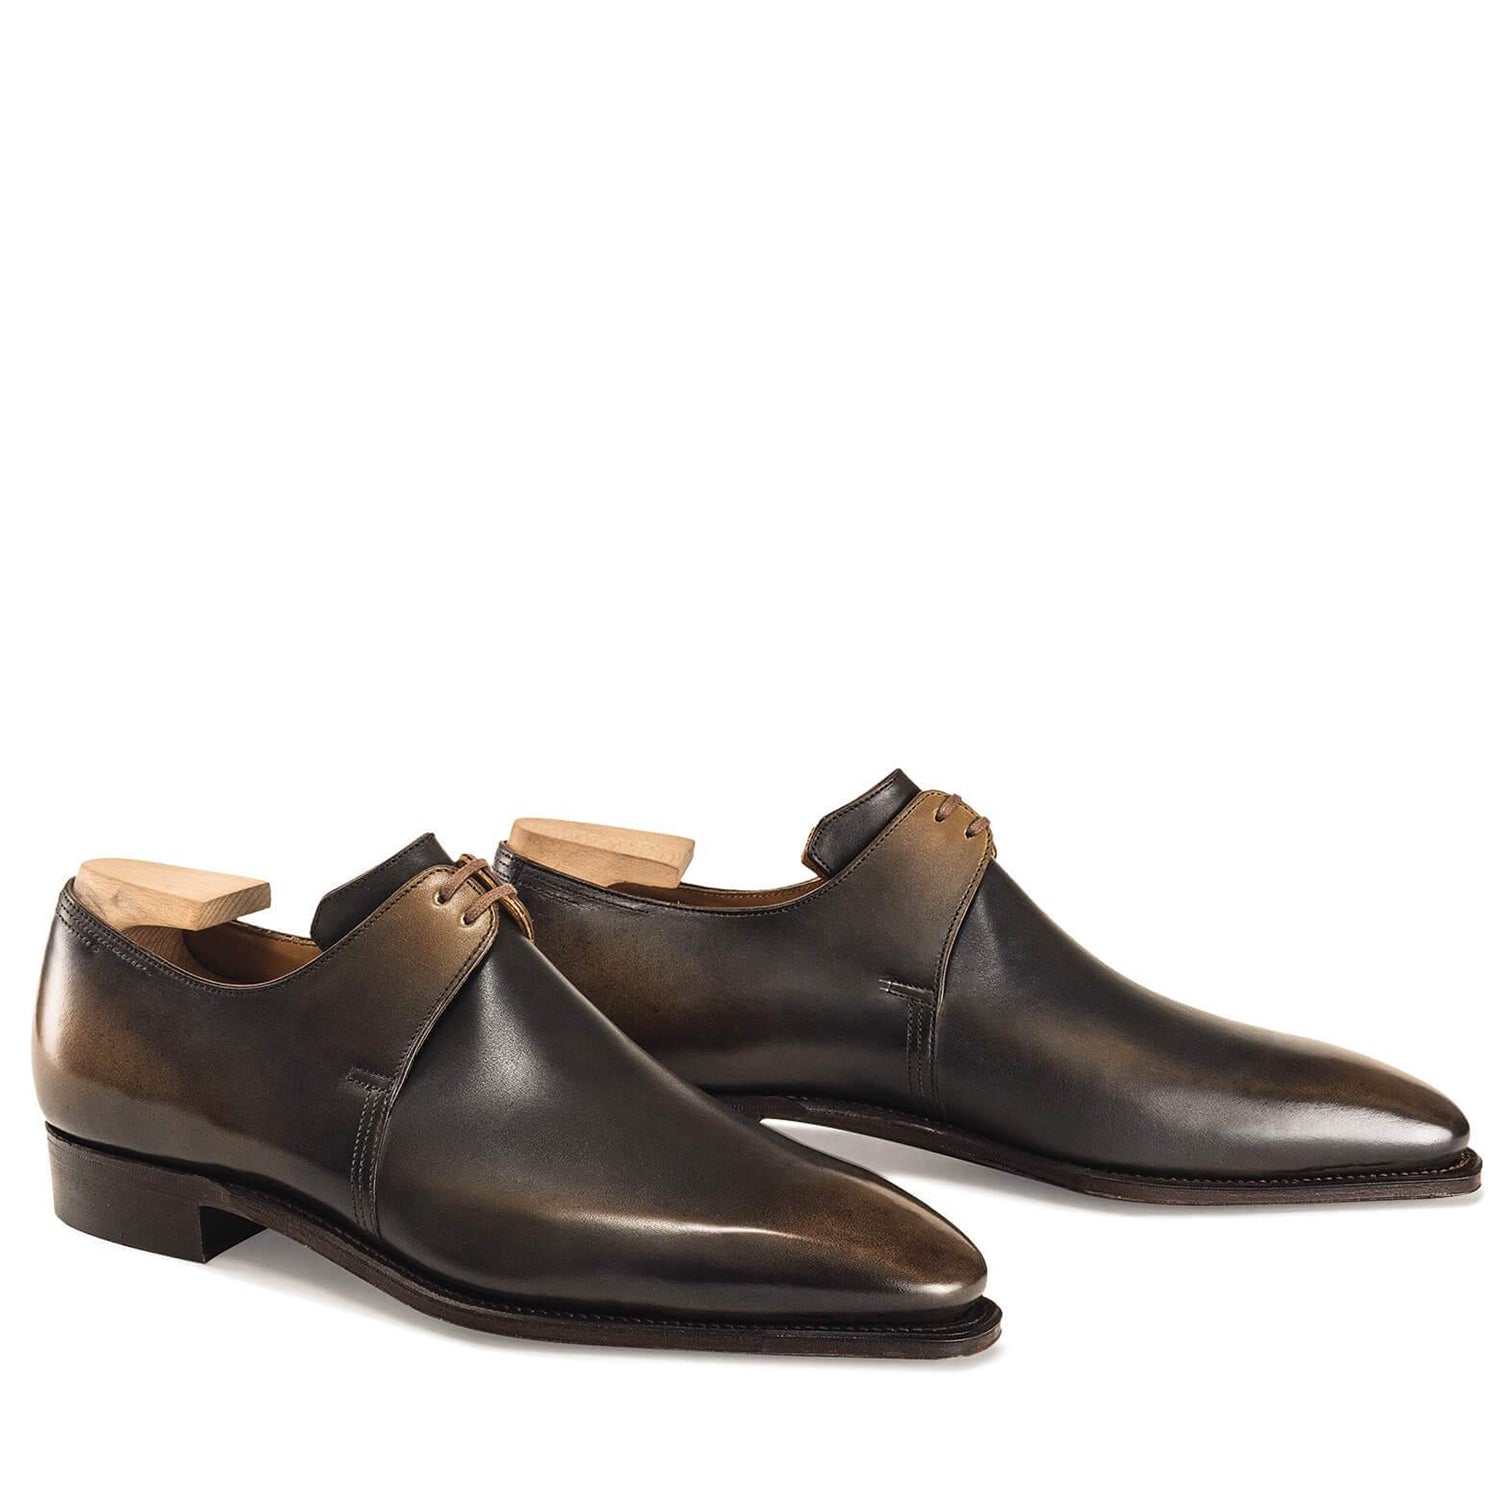 Old Black Calf Leather Shoes